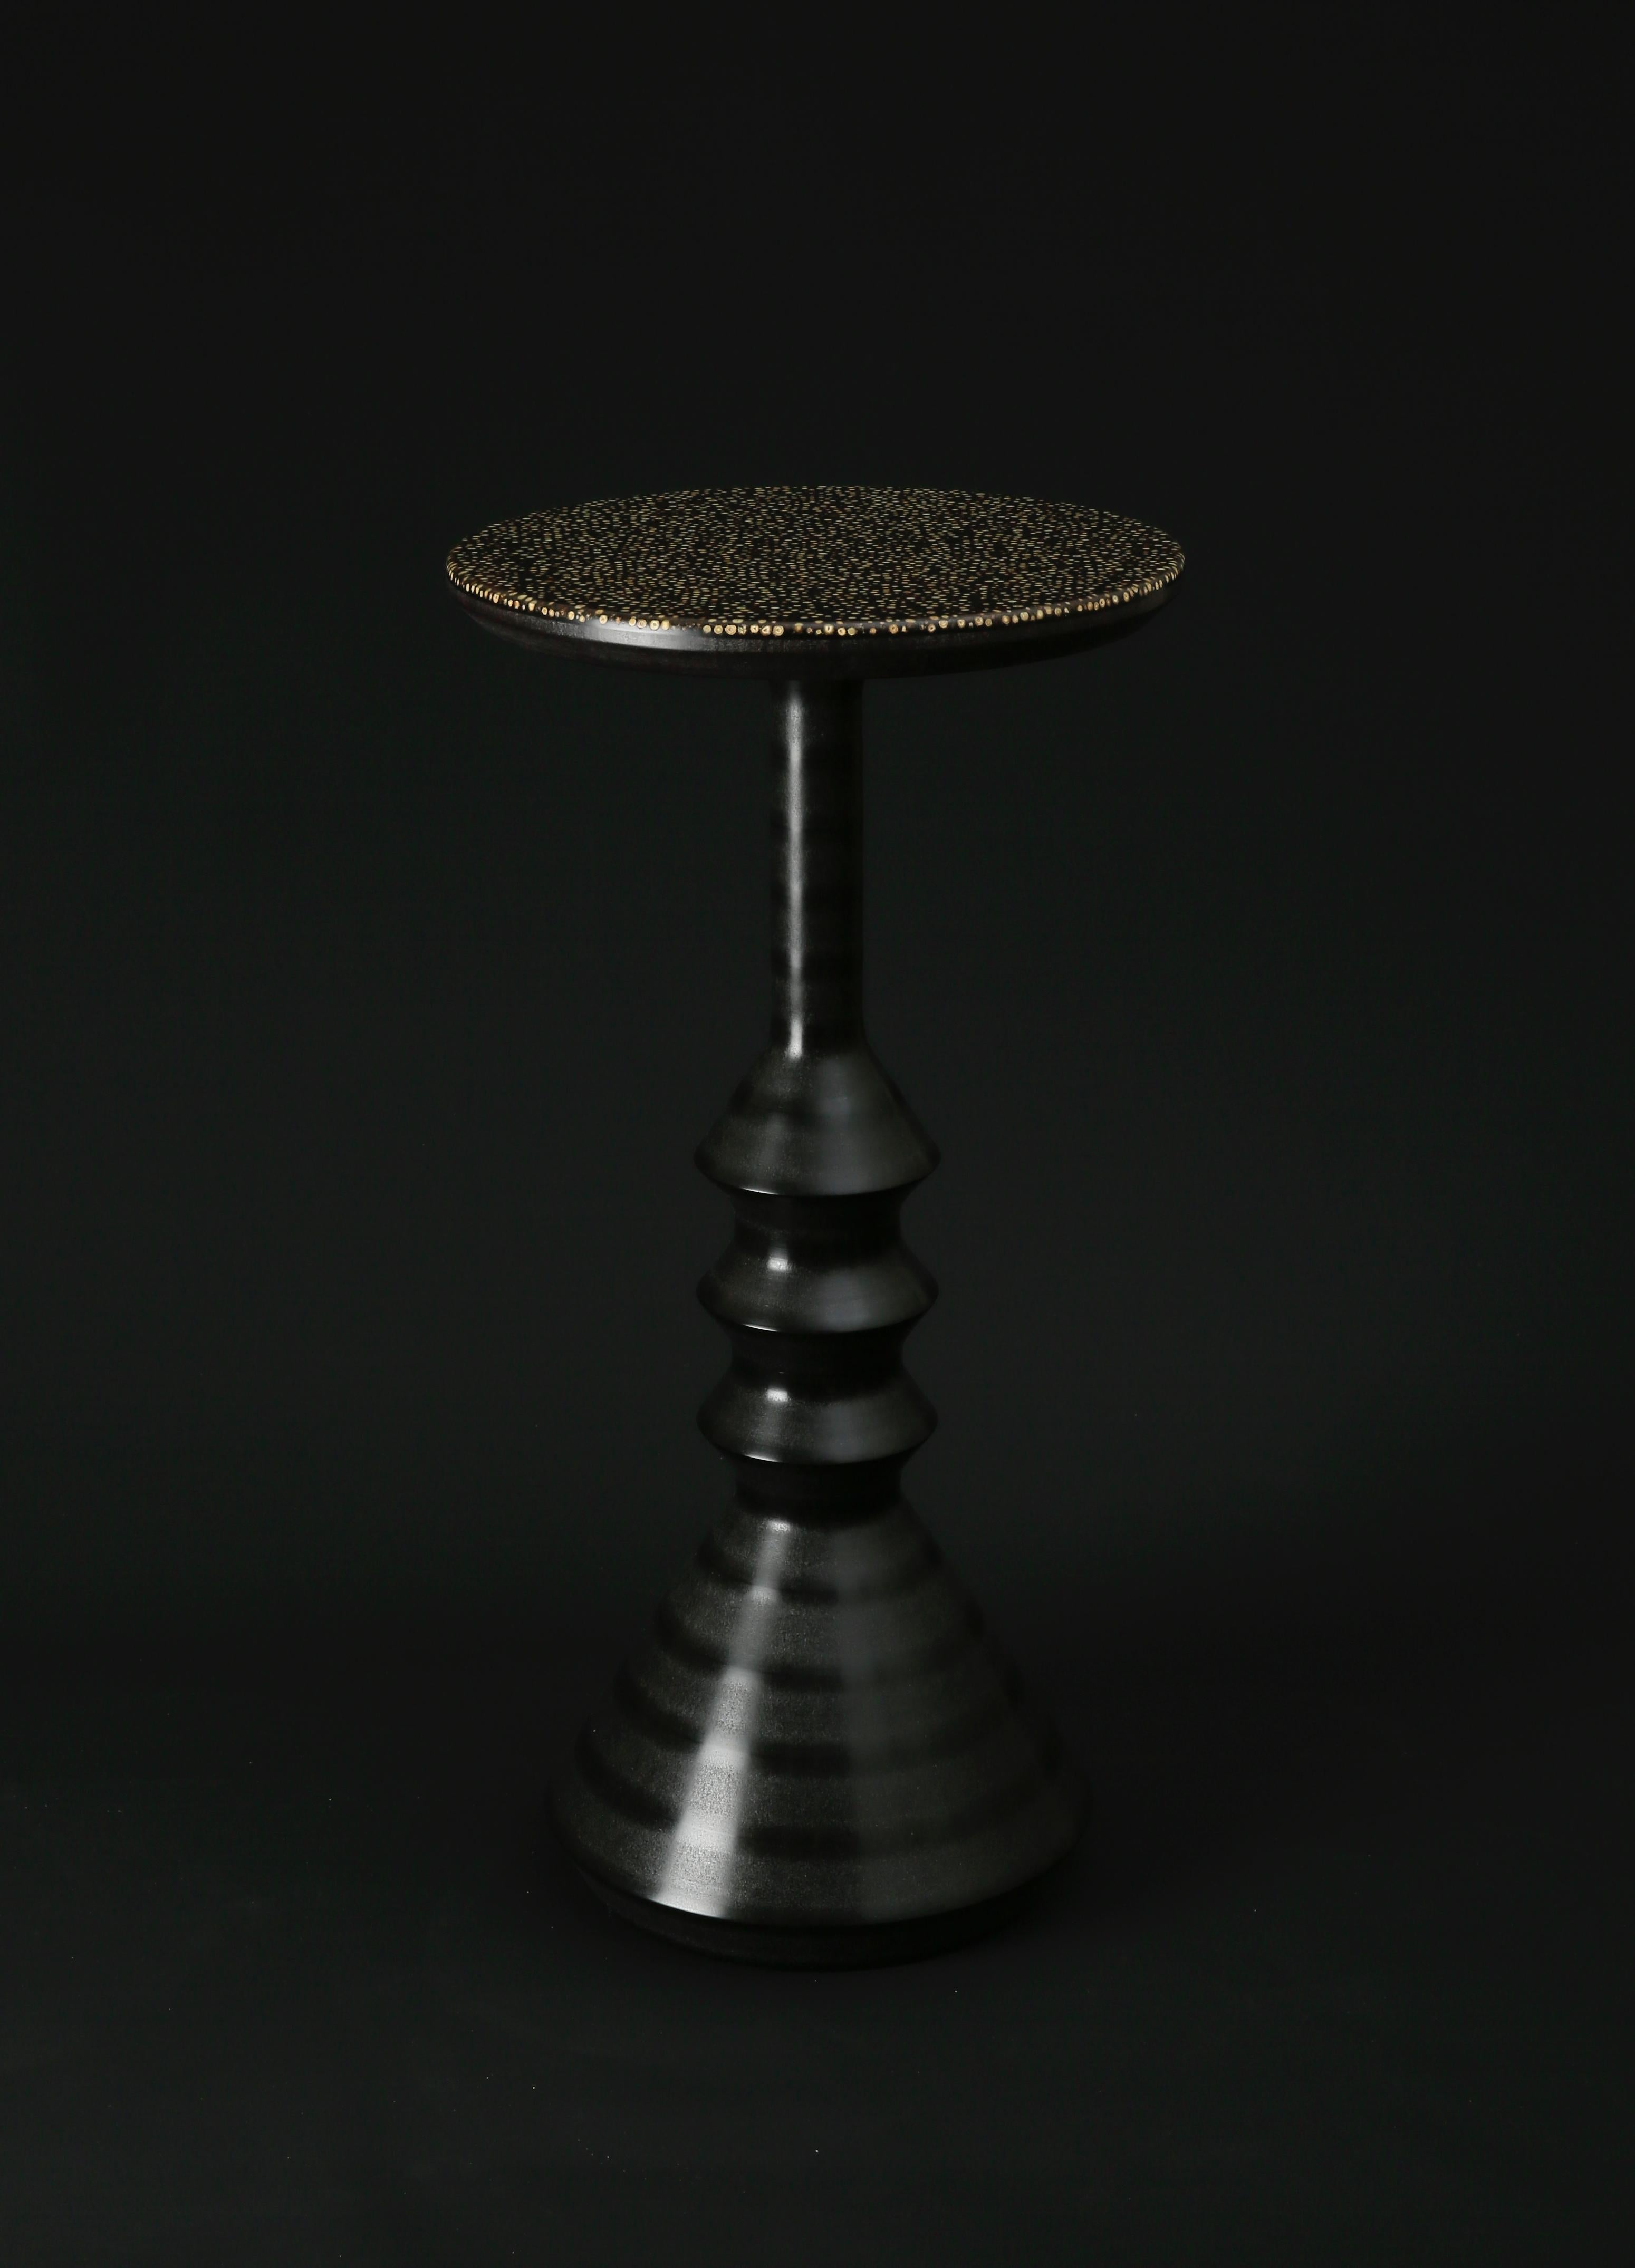 'Spool' is a collection of side tables featuring the 'Piper' peppercorn surface in a range of new colourways. Piper is a composite surface made in several layers incorporating real whole peppercorns and tinted and clear resins. The pleasing